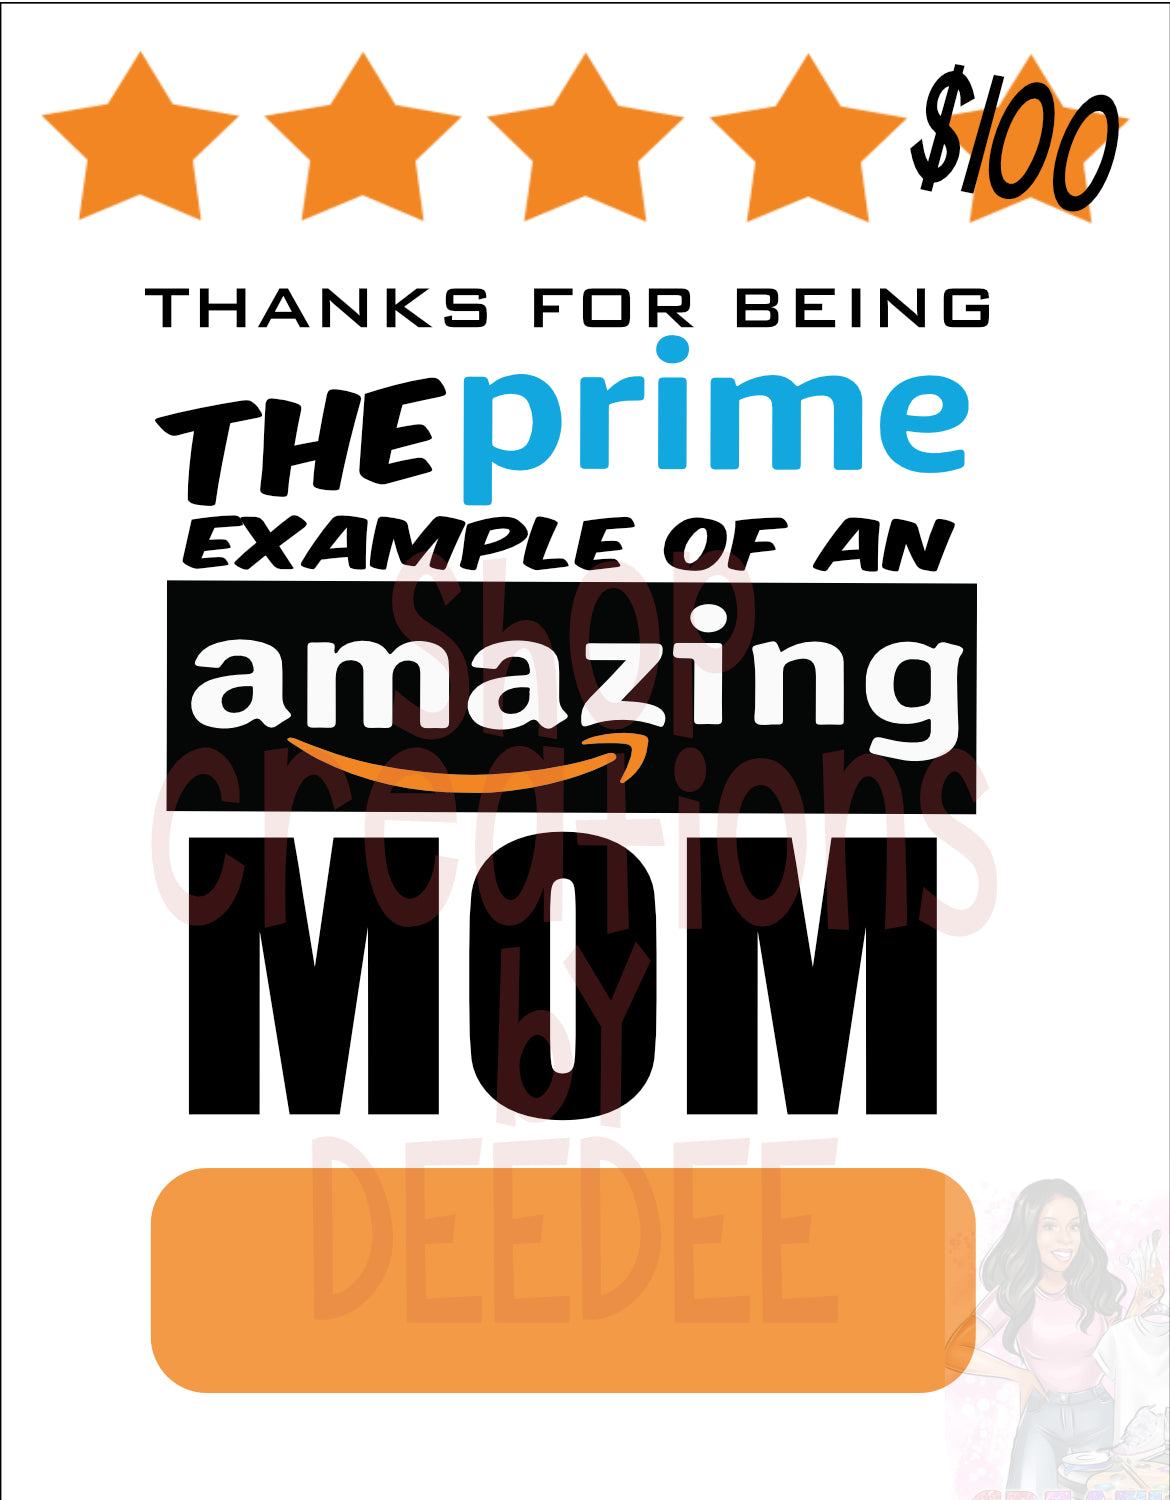 Prime Example of an Amazing Mom - Money Holder Card